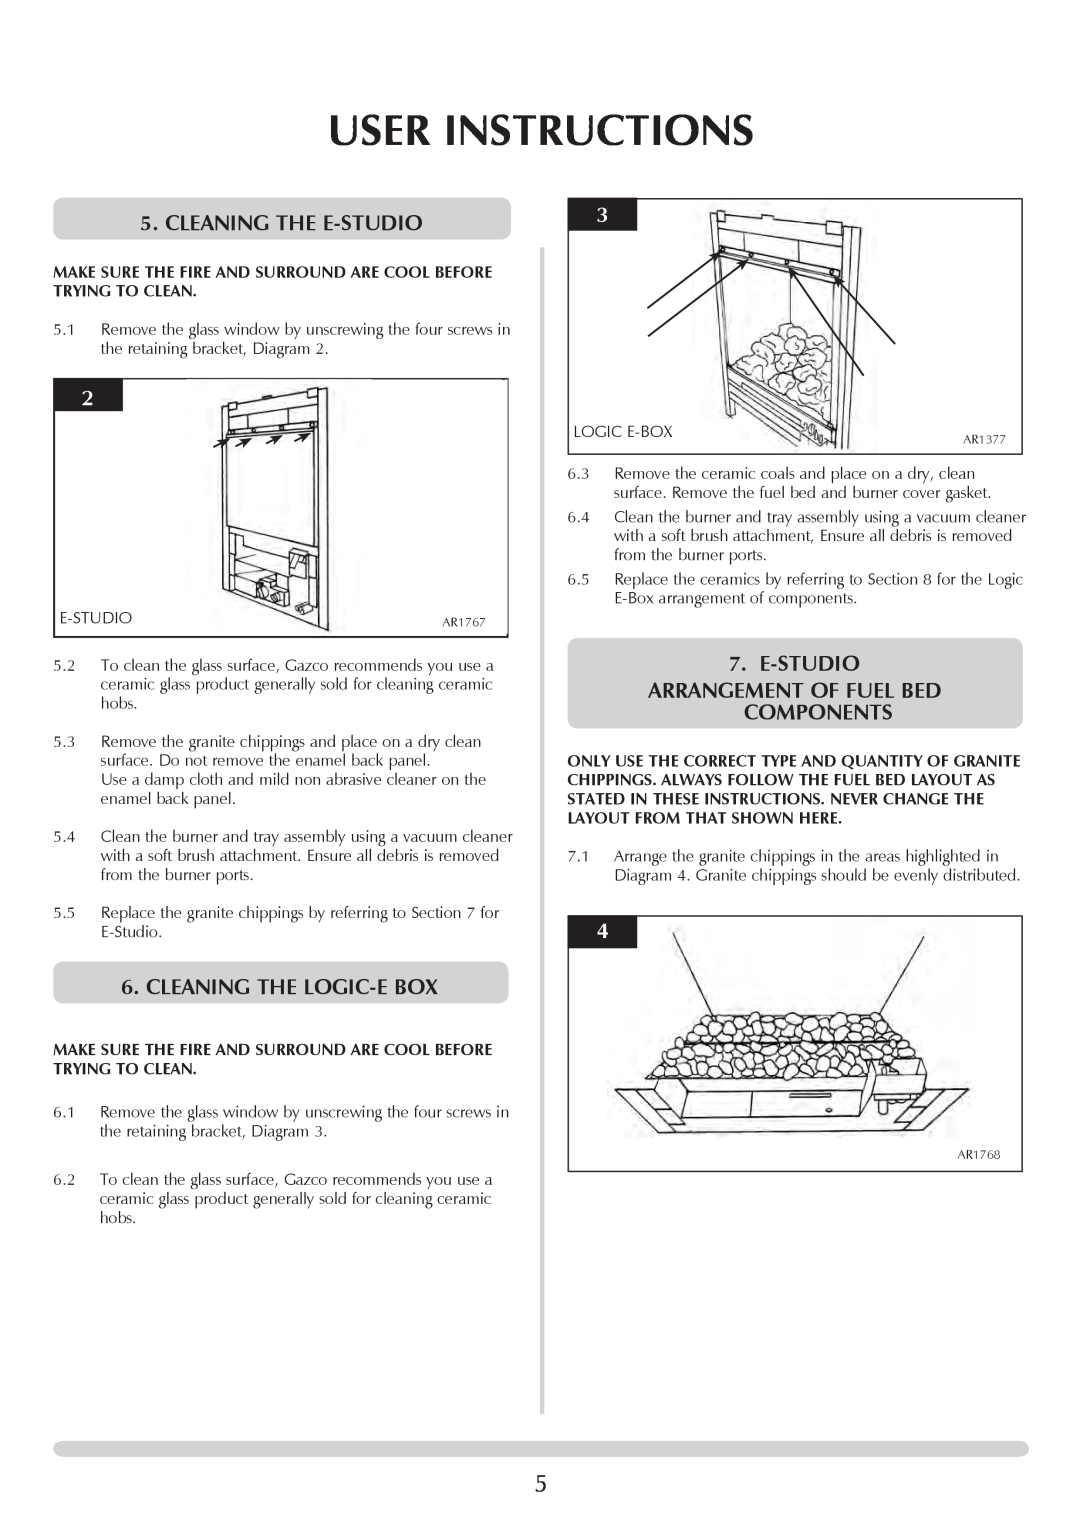 Stovax PR0741 manual User Instructions, Cleaning the E-studio, Cleaning the logic-ebox 